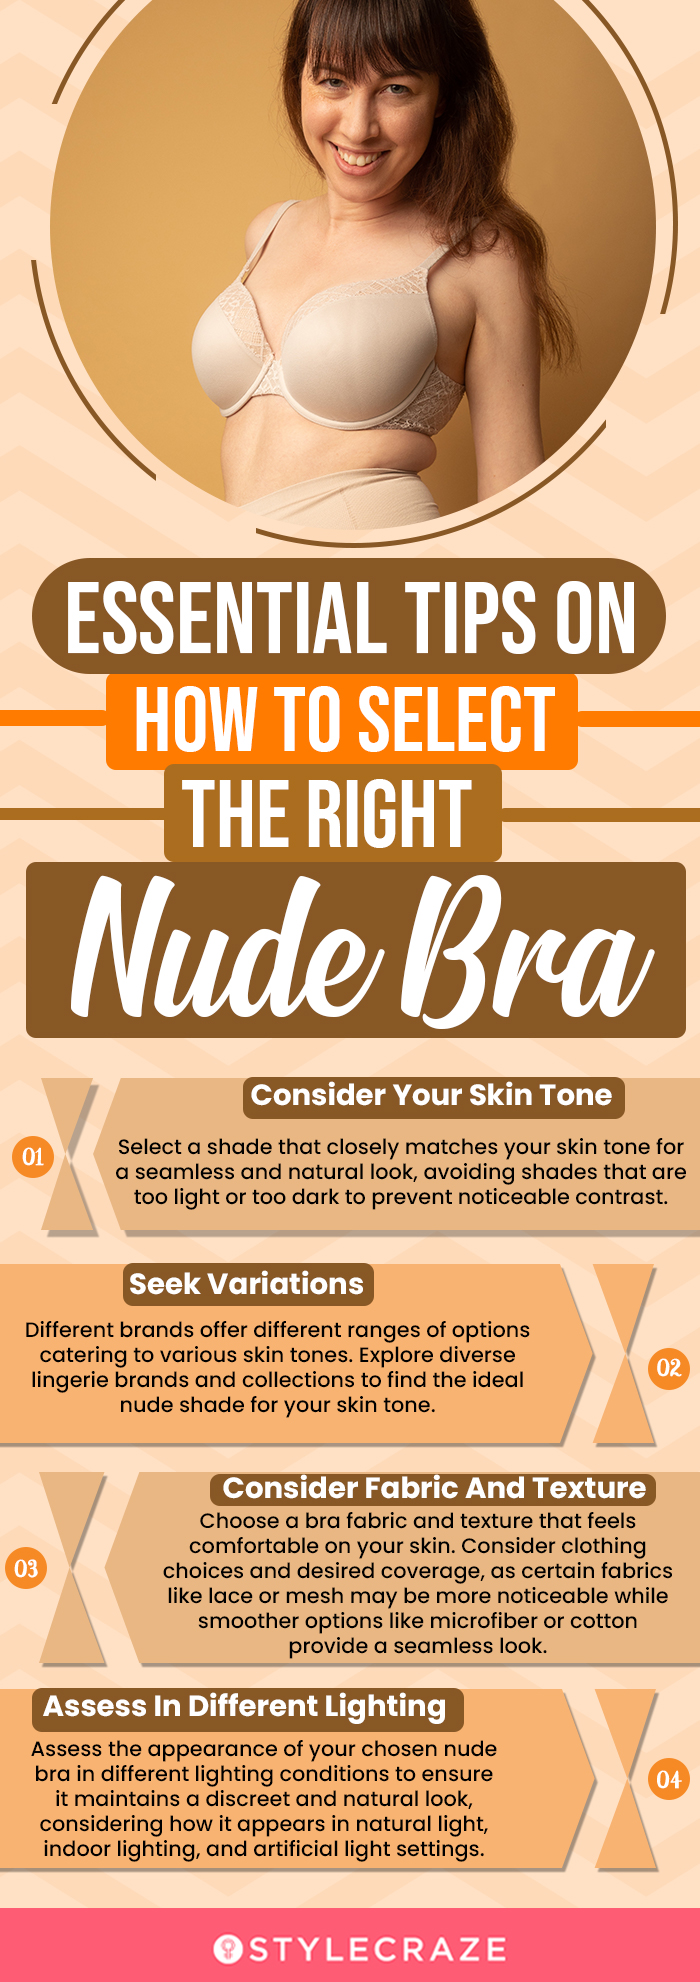 Essential Tips On How To Select The Right Nude Bra (infographic)